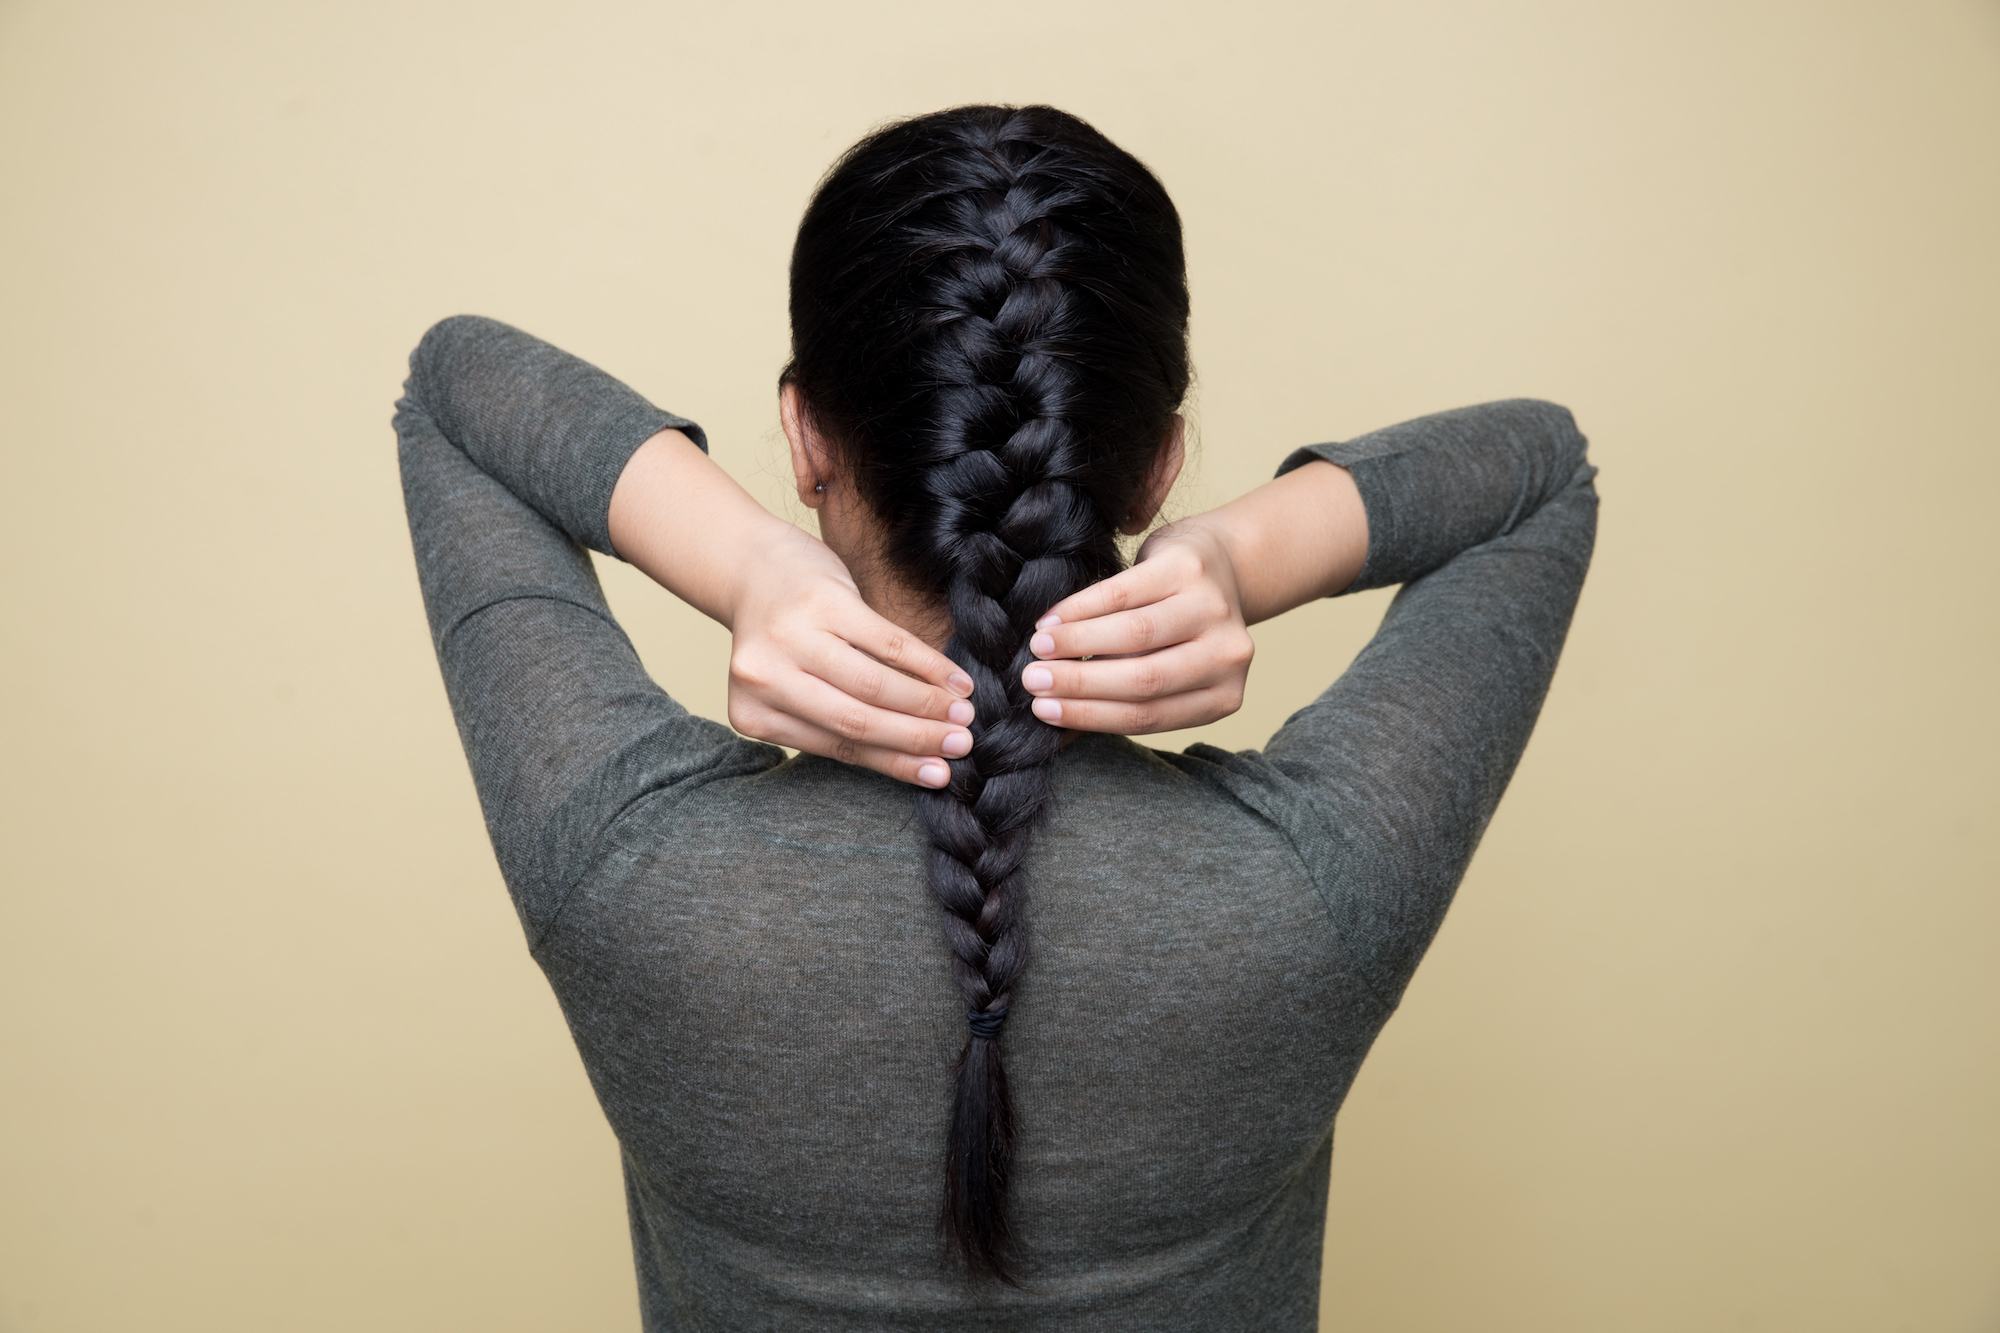 How To Braid Hair: 7 Types You Can Learn At Home - Kings Plate